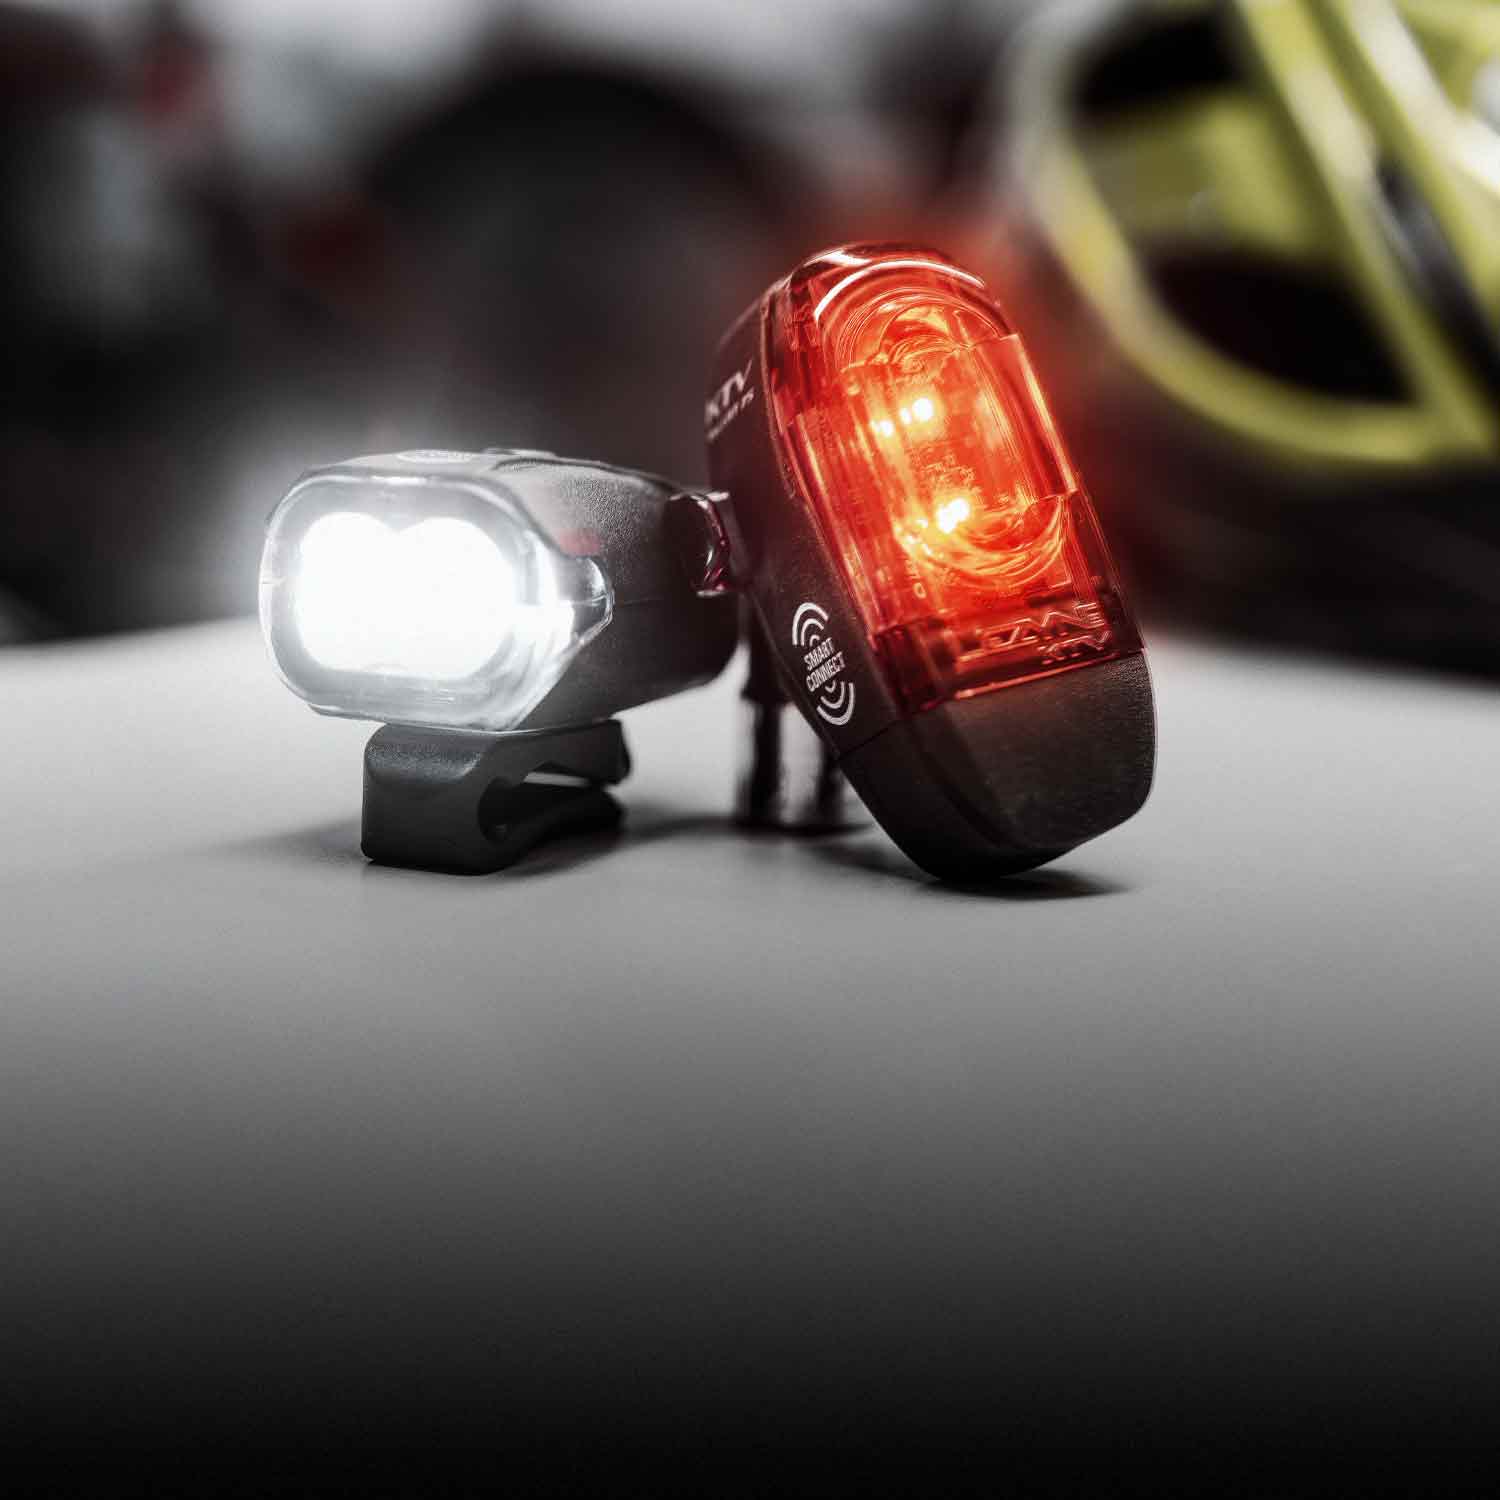 A bright front light next to a red rear light with the Smart Connect logo printed on the side.